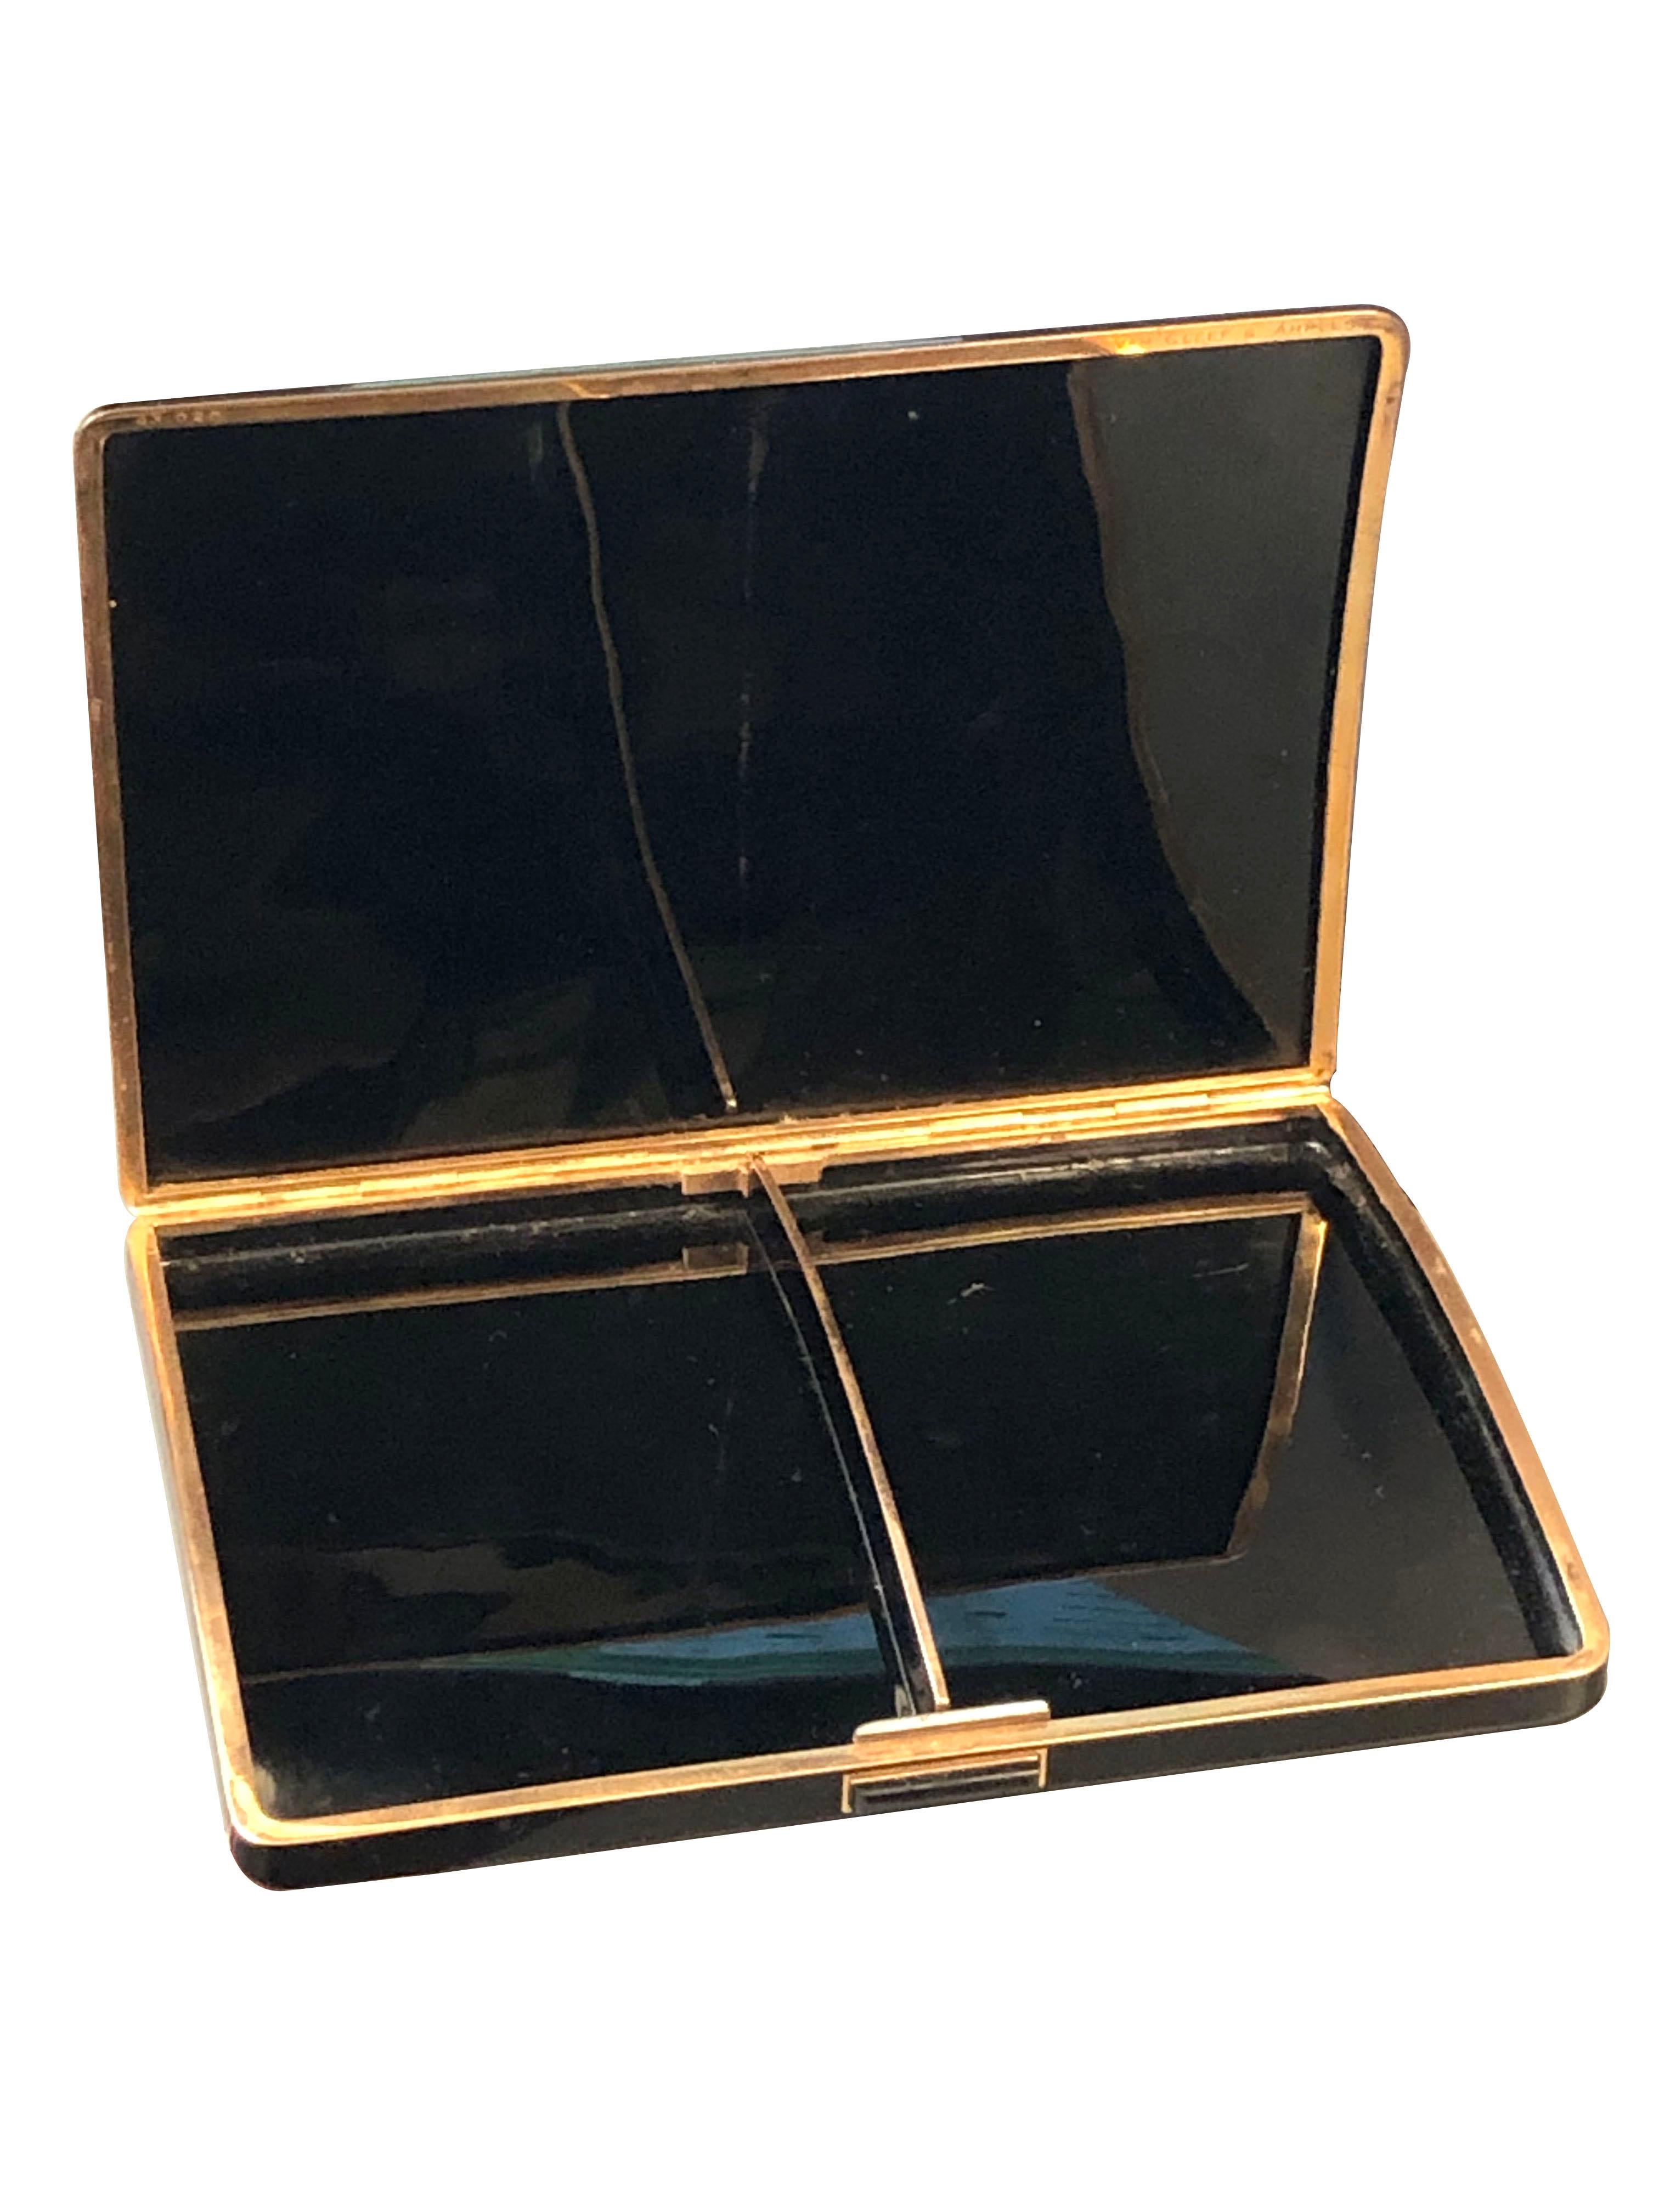 Circa 1950s Van Cleef & Arpels Cigarette Case, measuring 5 1/2 X 4 inches and 1/2 inch deep, Gold Gilt metal and Black enamel with an onyx push piece, signed, numbered and and comes in the original suede pouch.